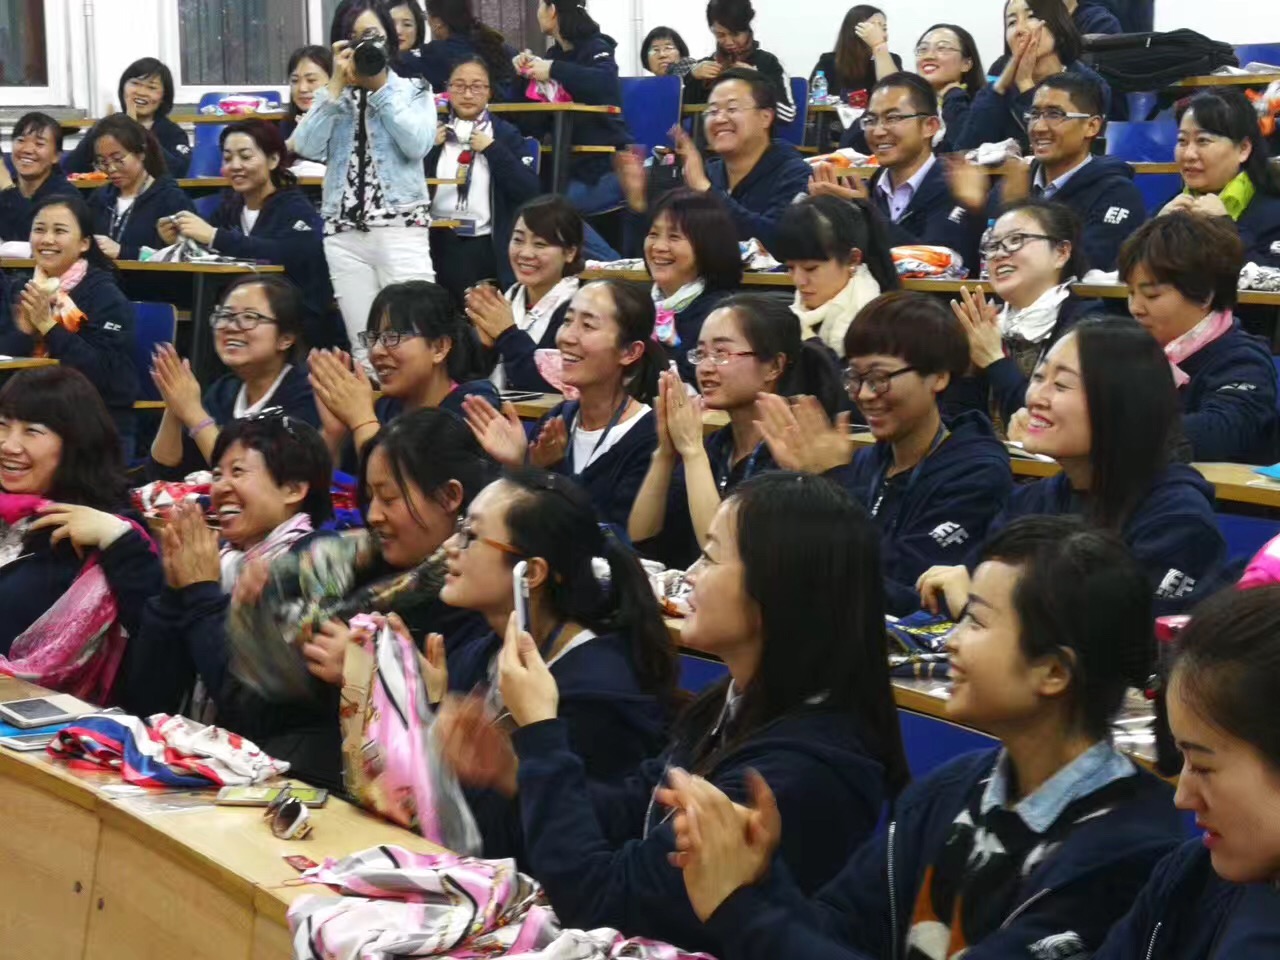 Over 100 village teachers listen to lectures on April 4, 2017 in School of Foreign Languages of Peking University. [Photo: provided to China Plus] 